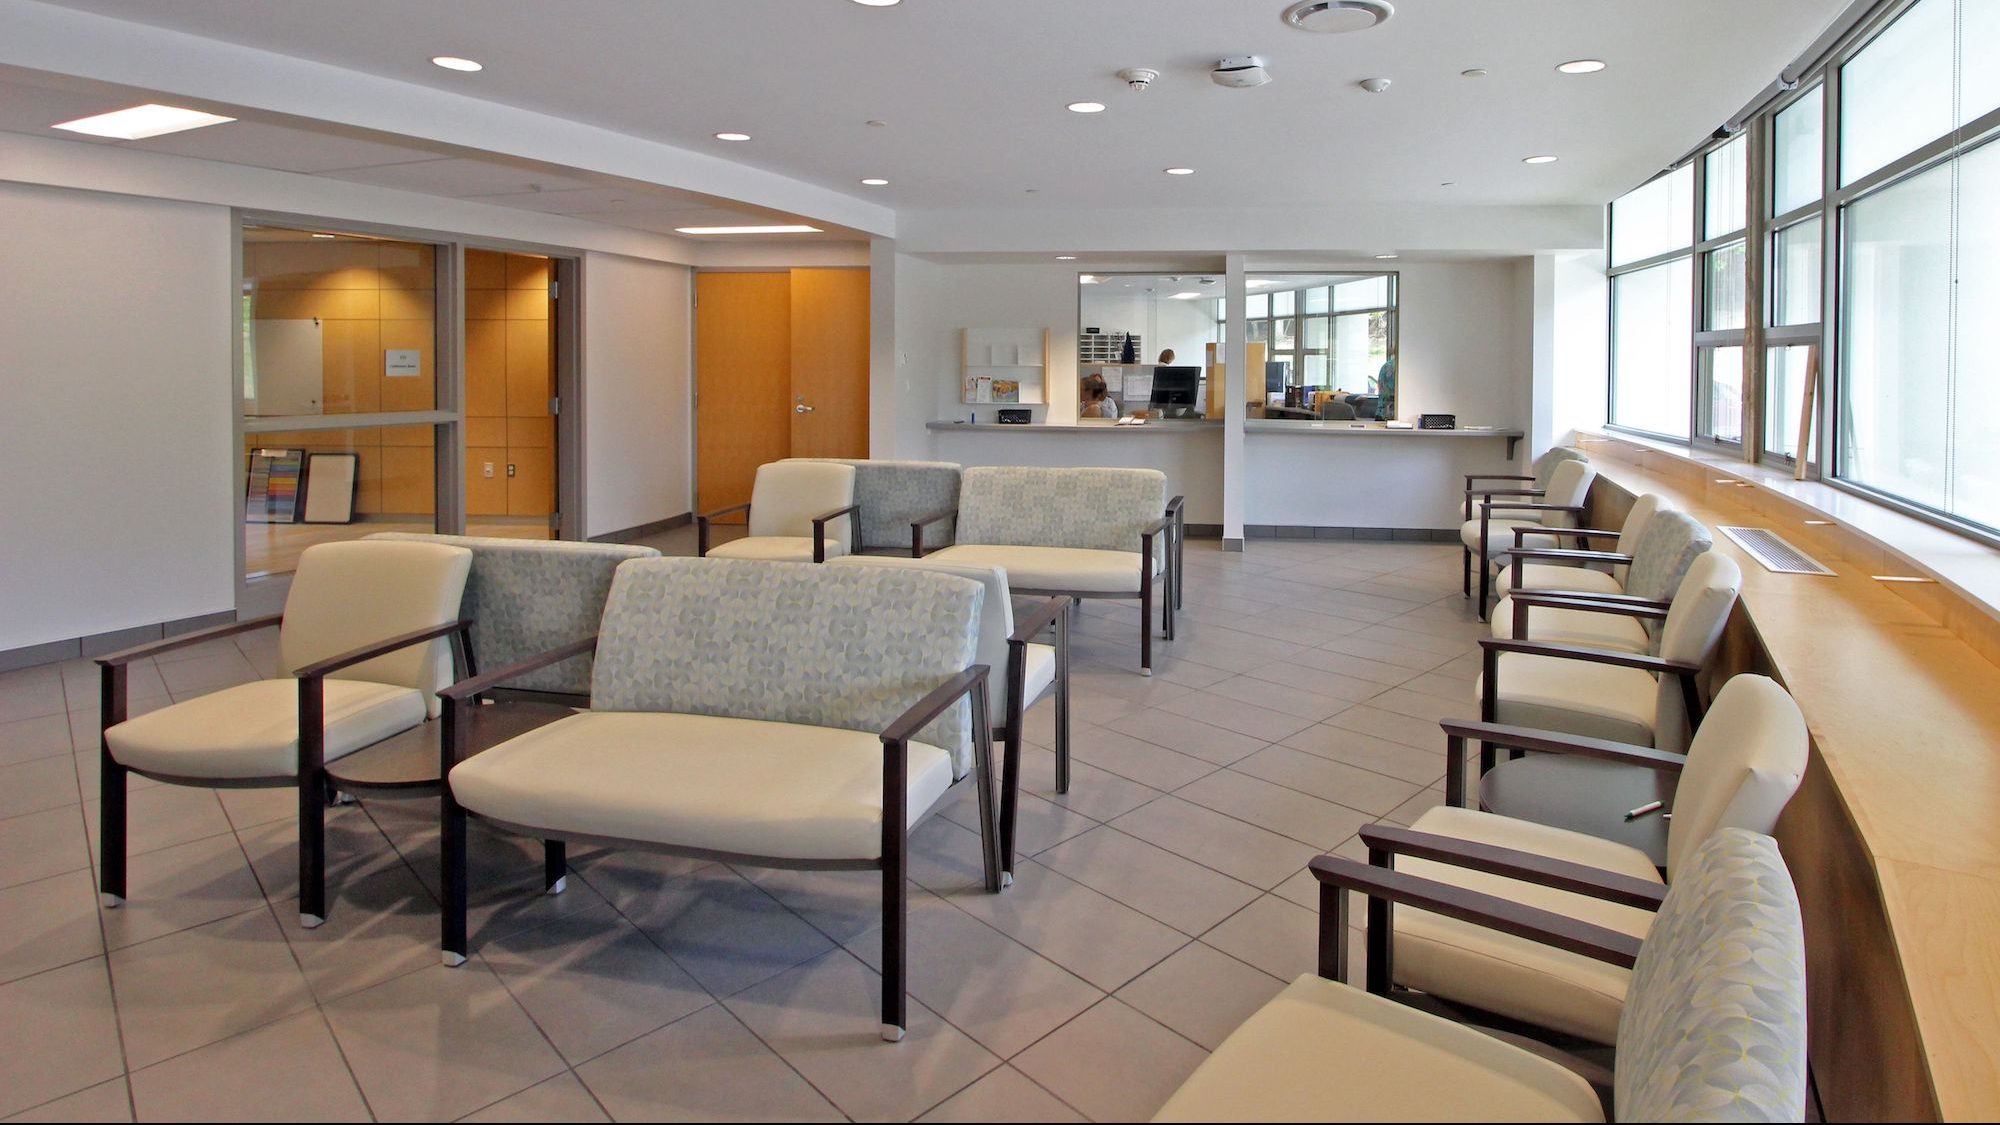 Counseling Health Center Waiting Room